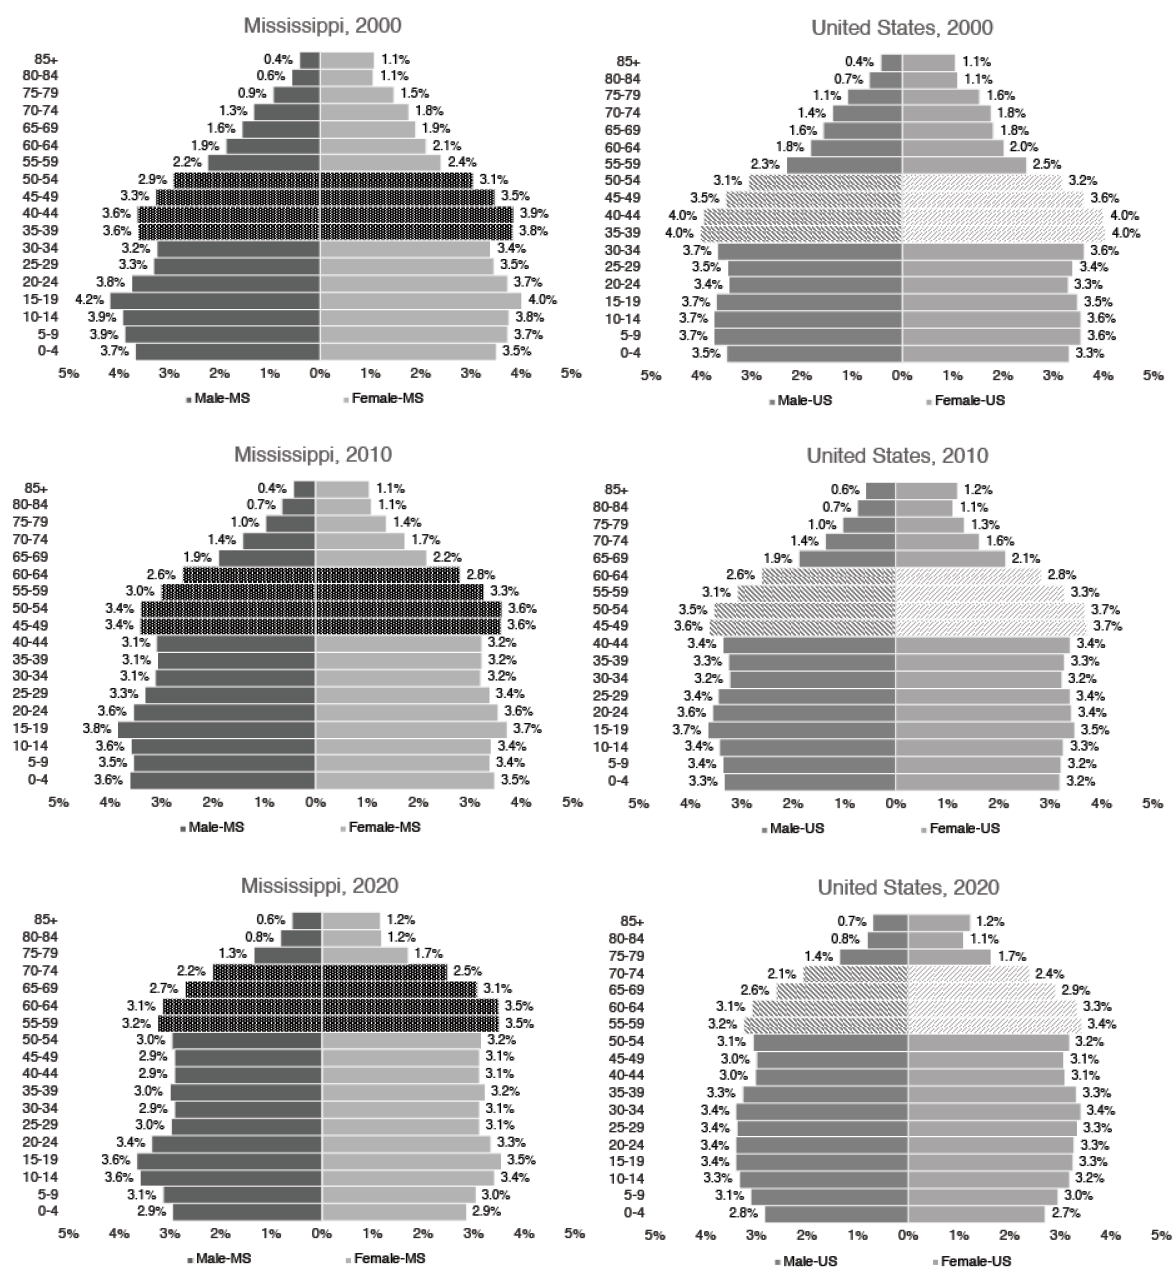 Population pyramids for Mississippi and the U.S. for the years 2000, 2010, and 2020. The data in these population pyramids is given in Tables 1a and 1b.